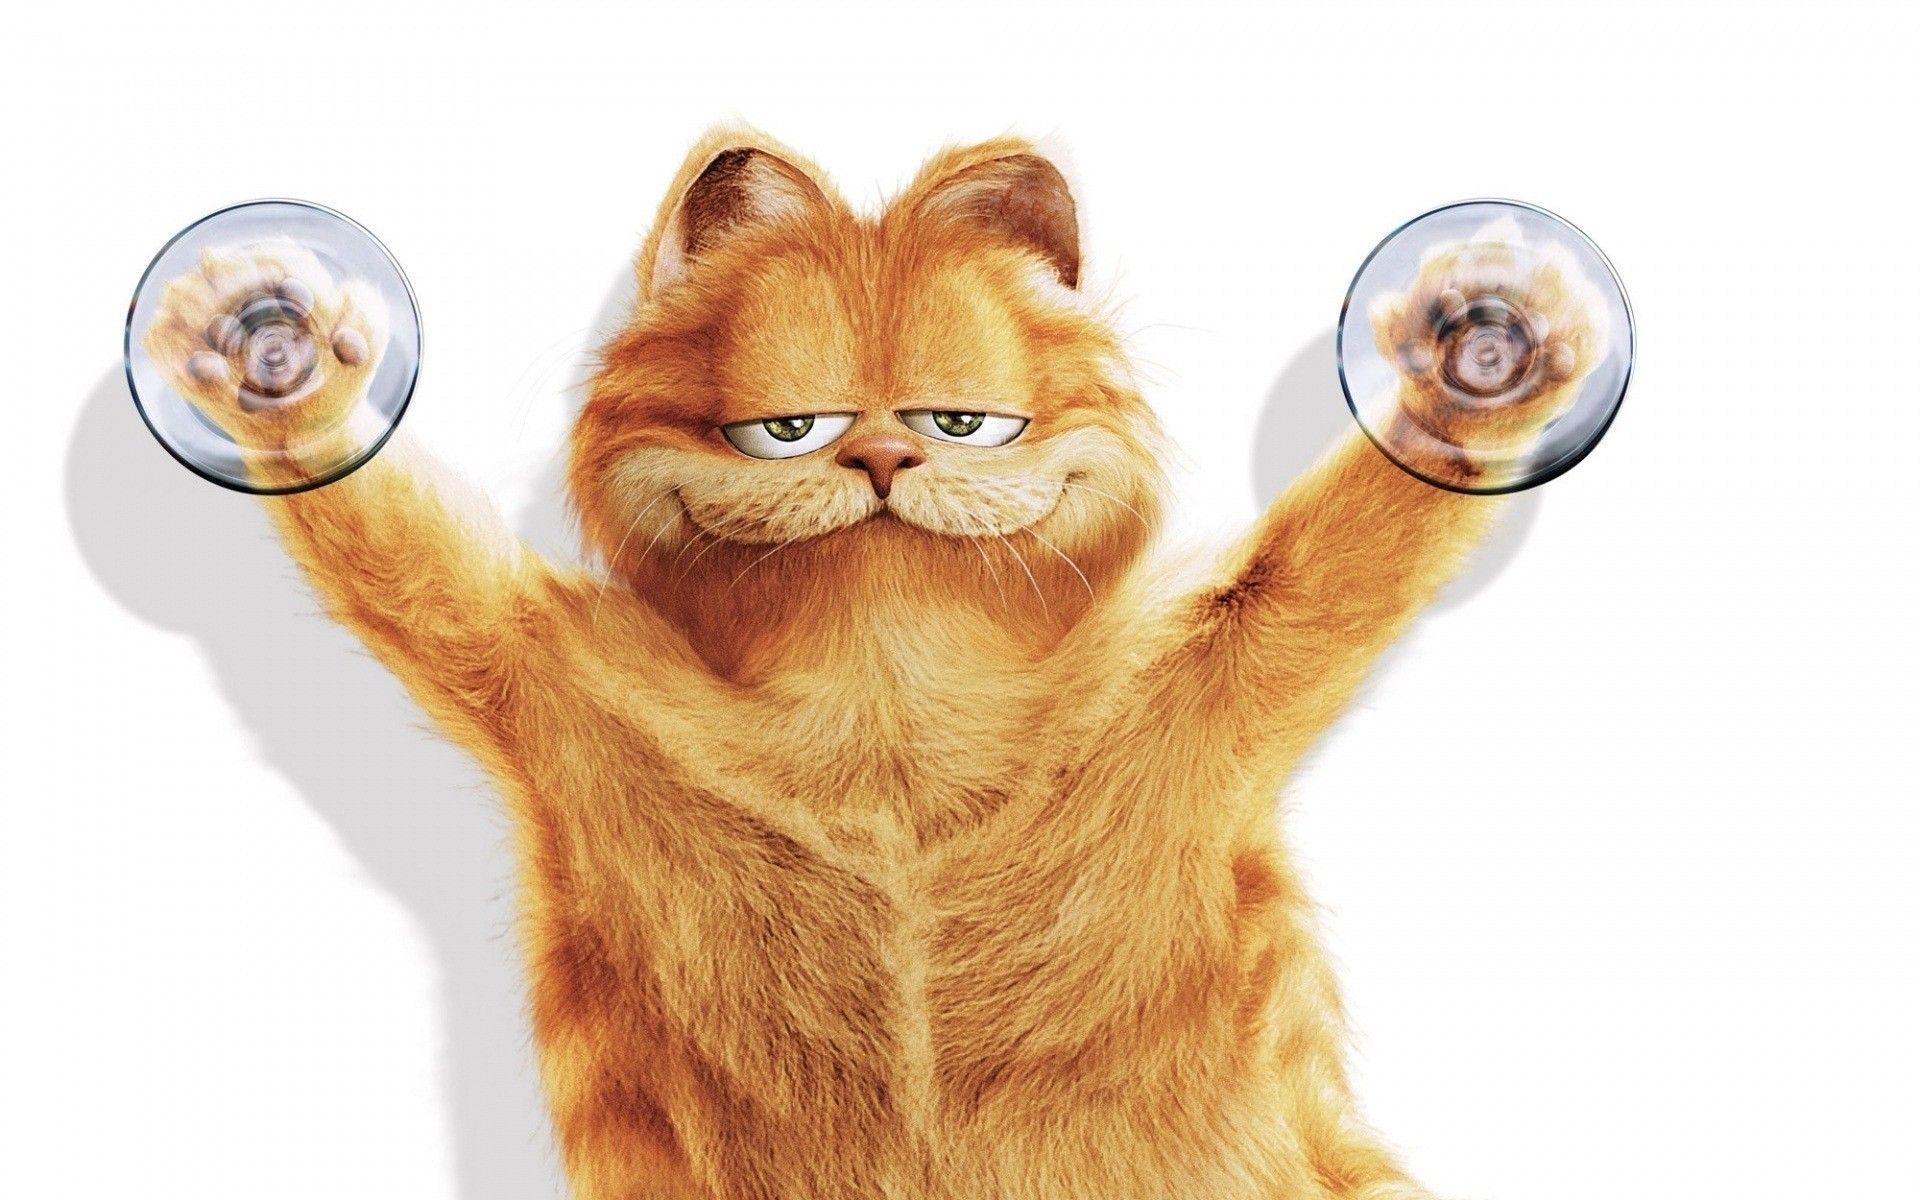 Garfield. Android wallpaper for free